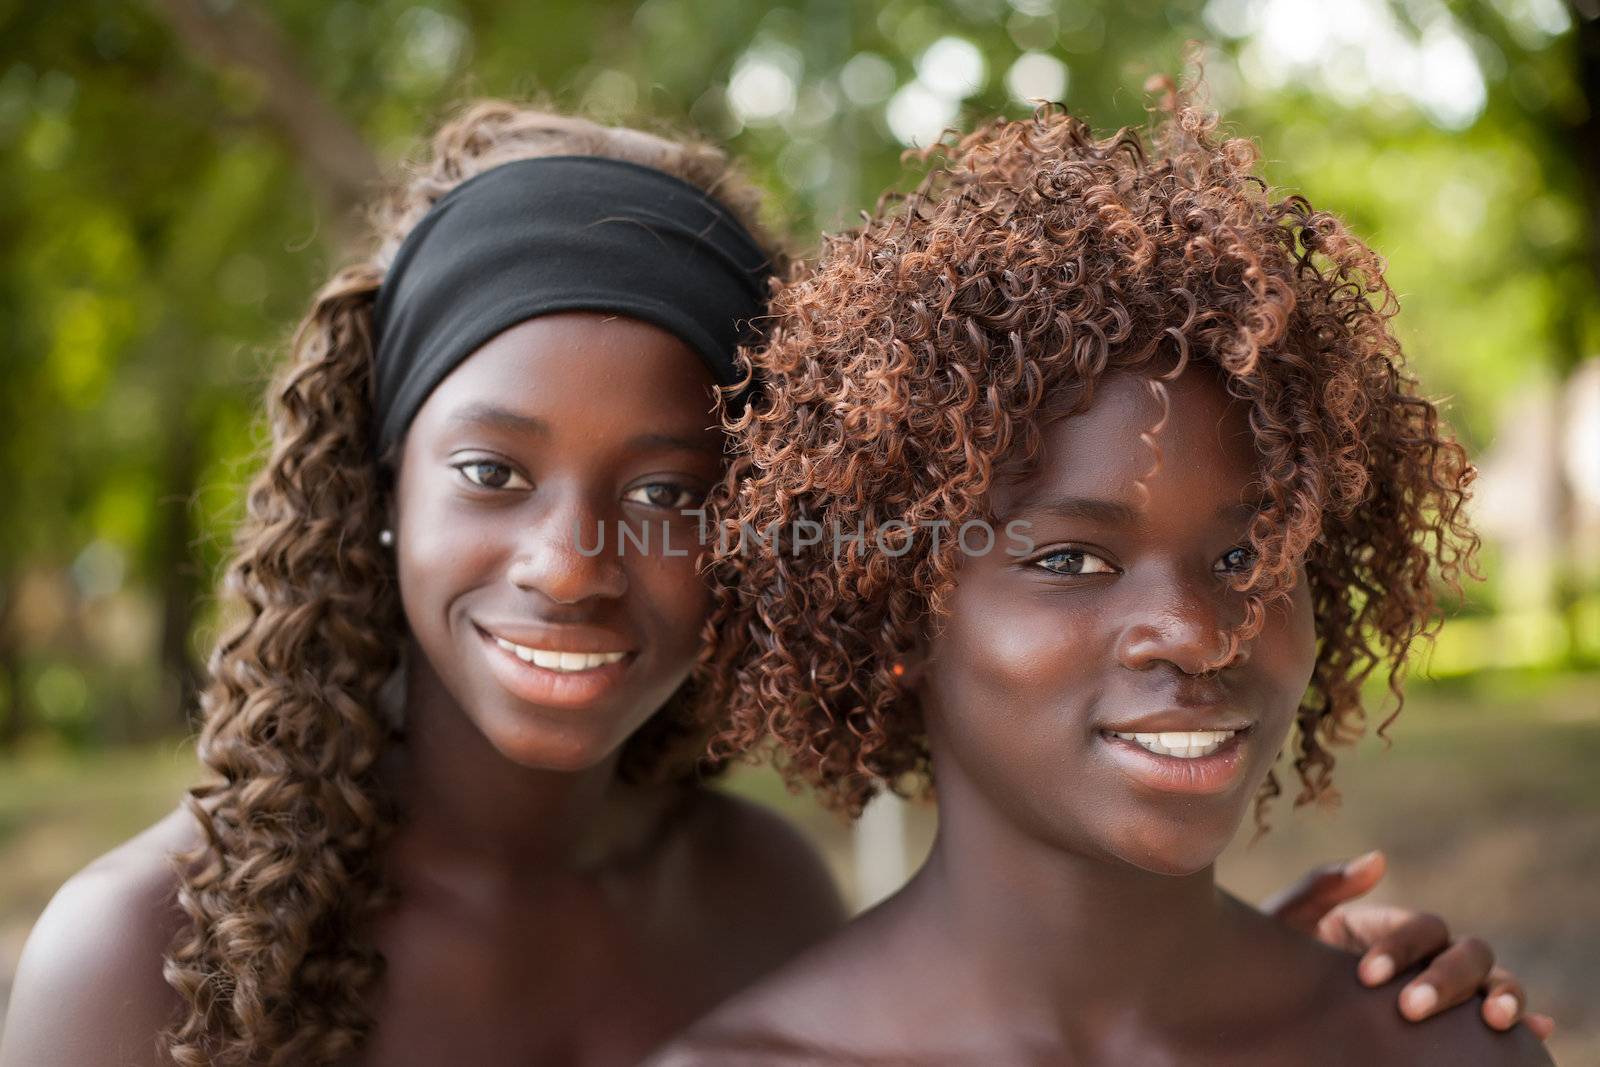 Happy african children having a nice dat at the park
